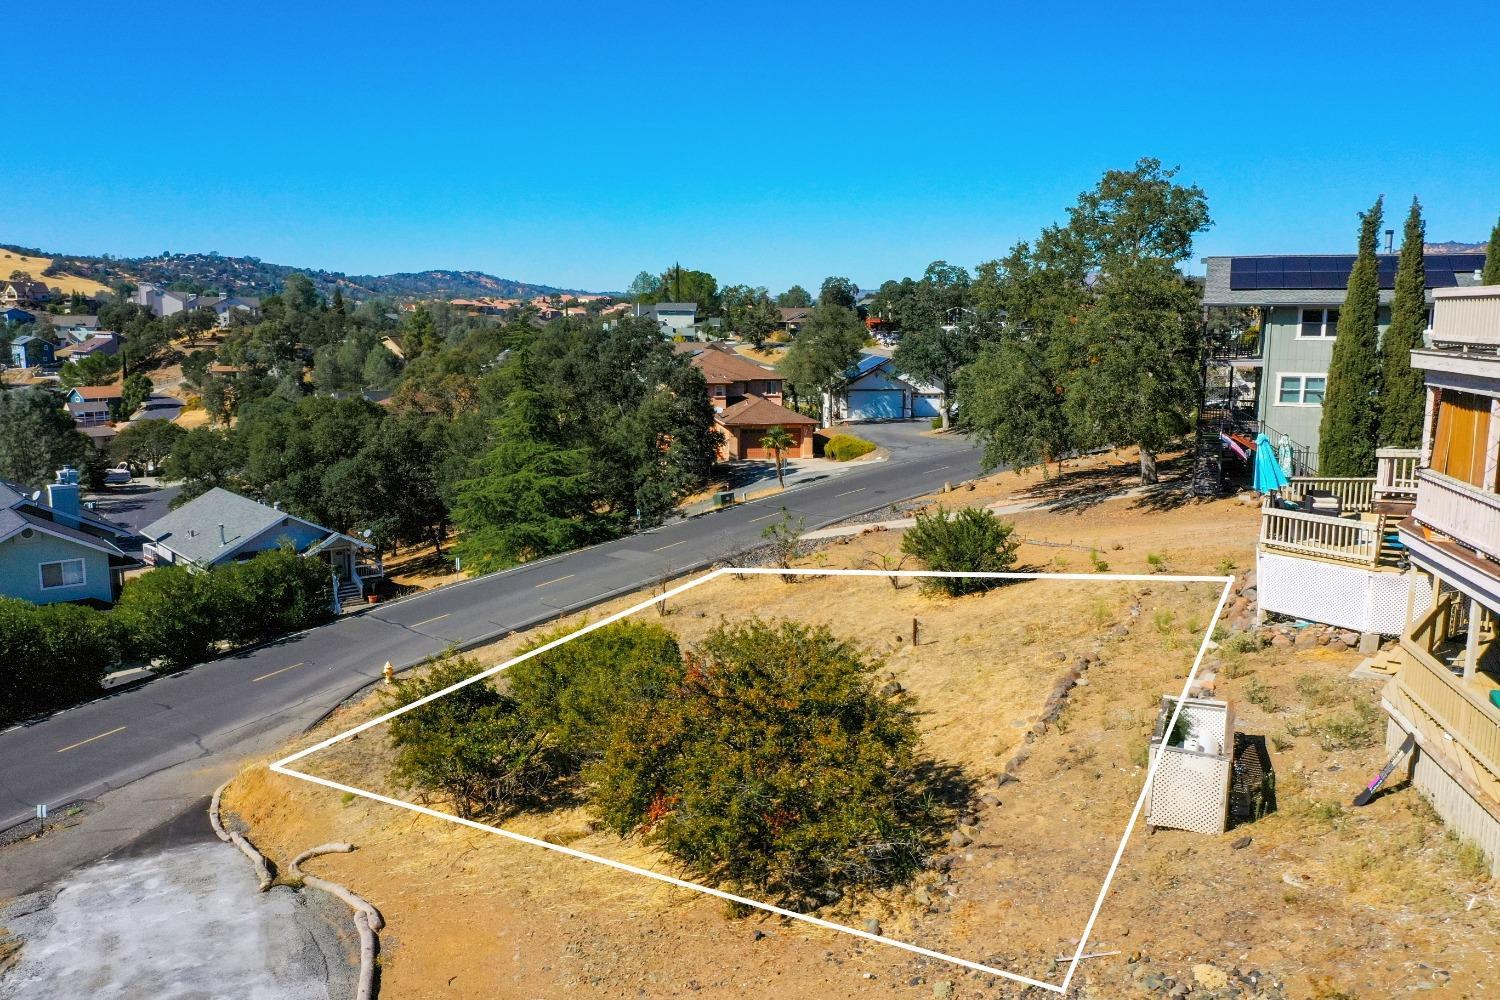 Photo of 573 Dolores Wy in Copperopolis, CA